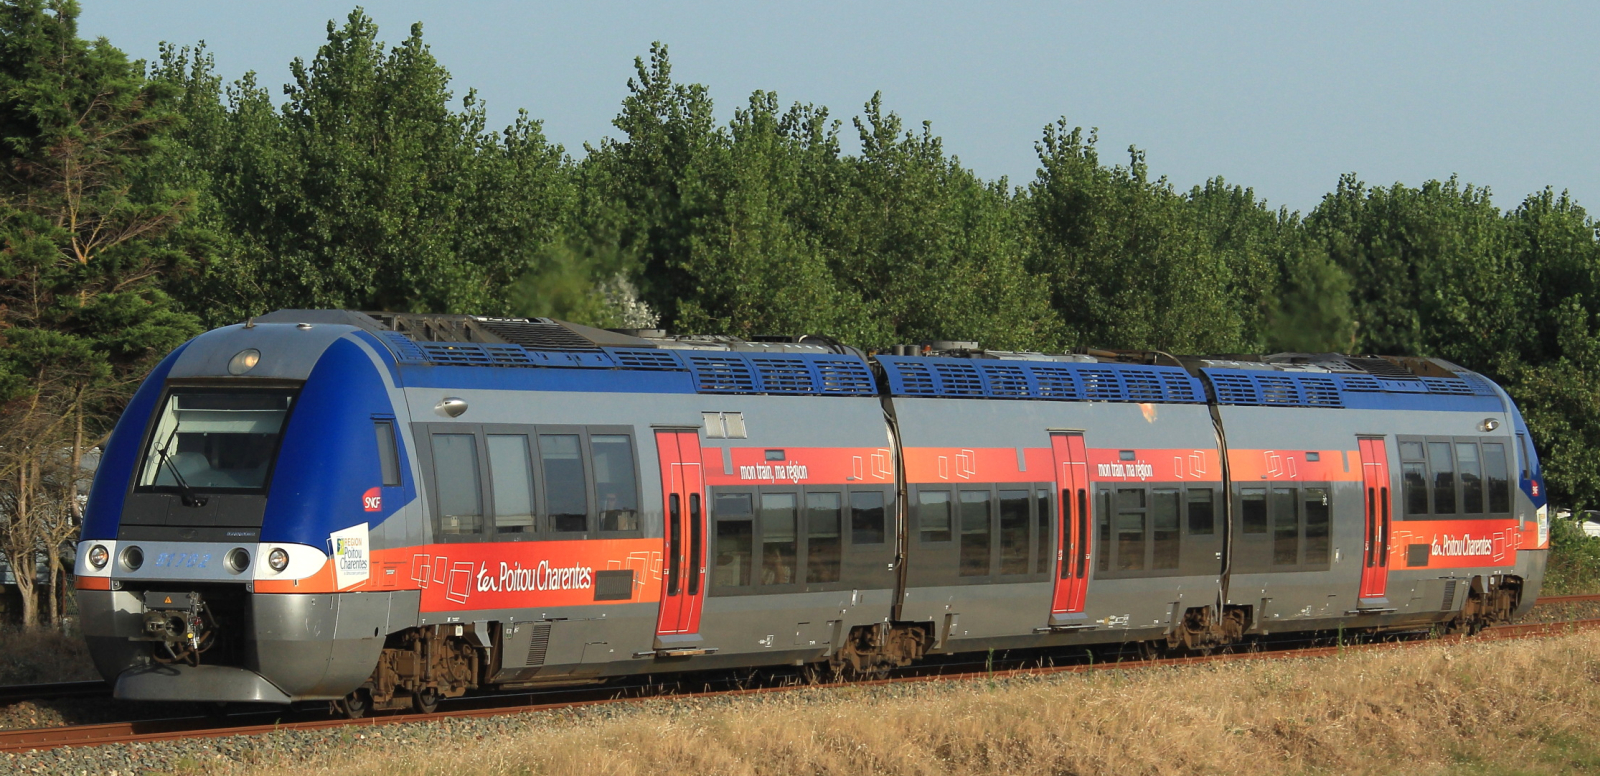 B 81701 of the TER Poitou-Charentes in August 2018 in diesel operation near Chatelaillon